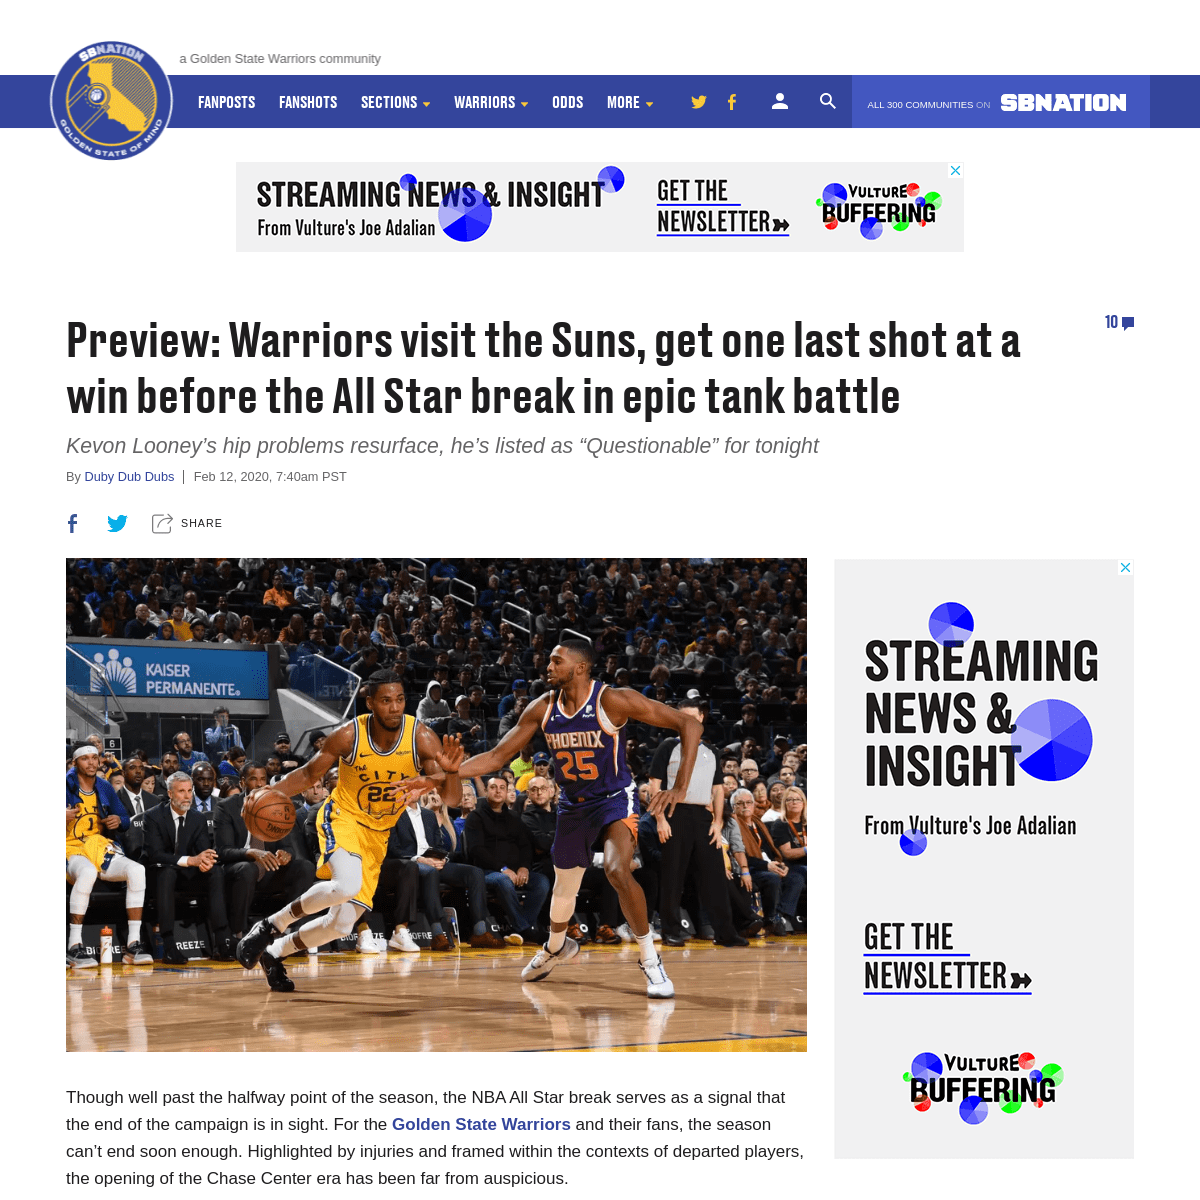 A complete backup of www.goldenstateofmind.com/2020/2/12/21133685/nba-2020-preview-warriors-visit-the-suns-get-one-last-shot-at-